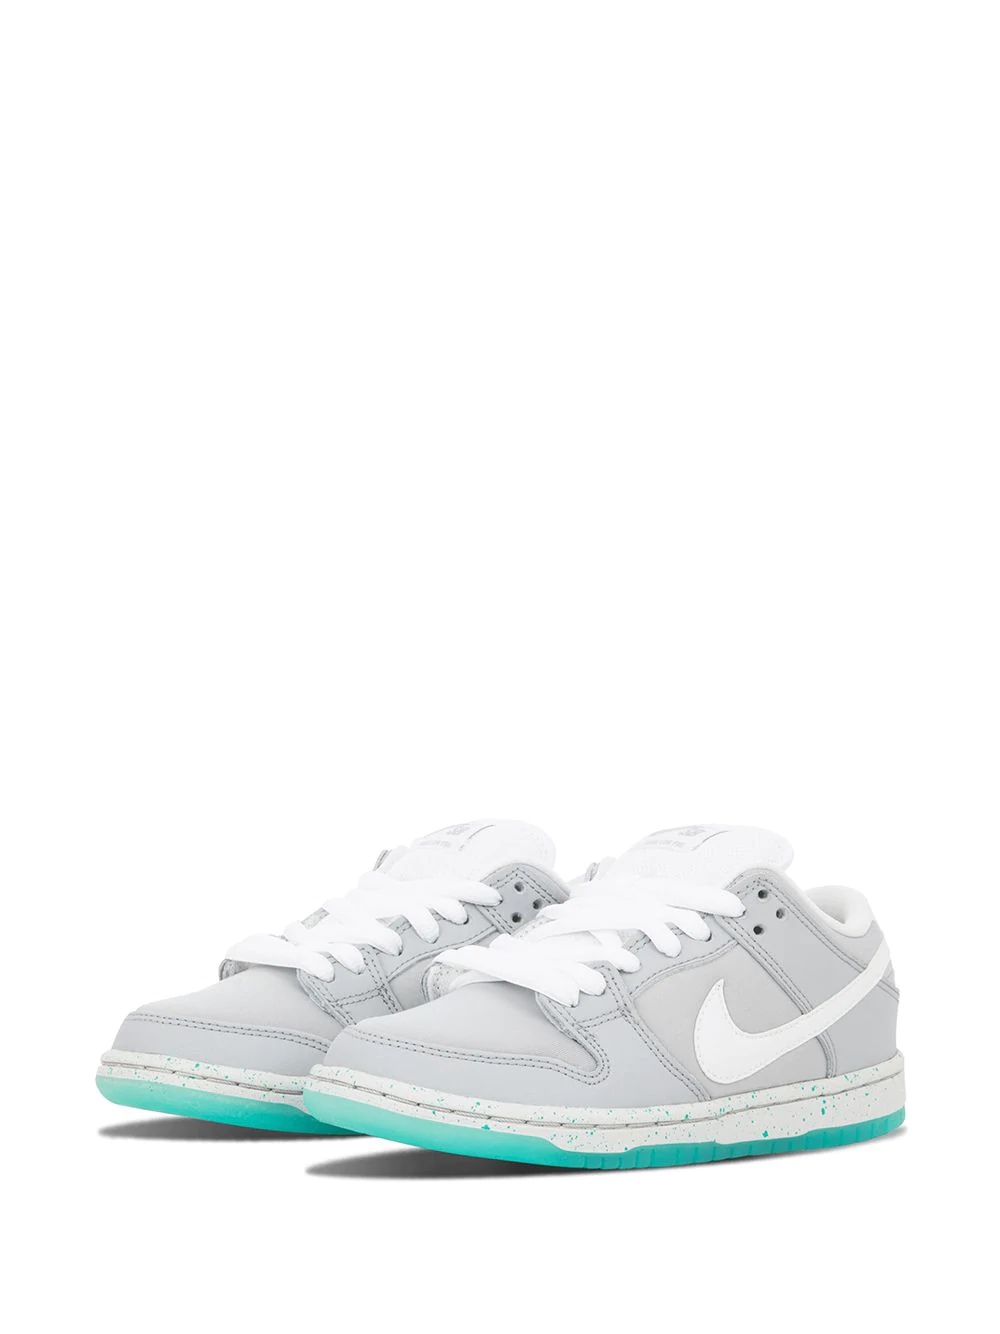 SB Dunk Low Premium "Marty Mcfly" sneakers - 2